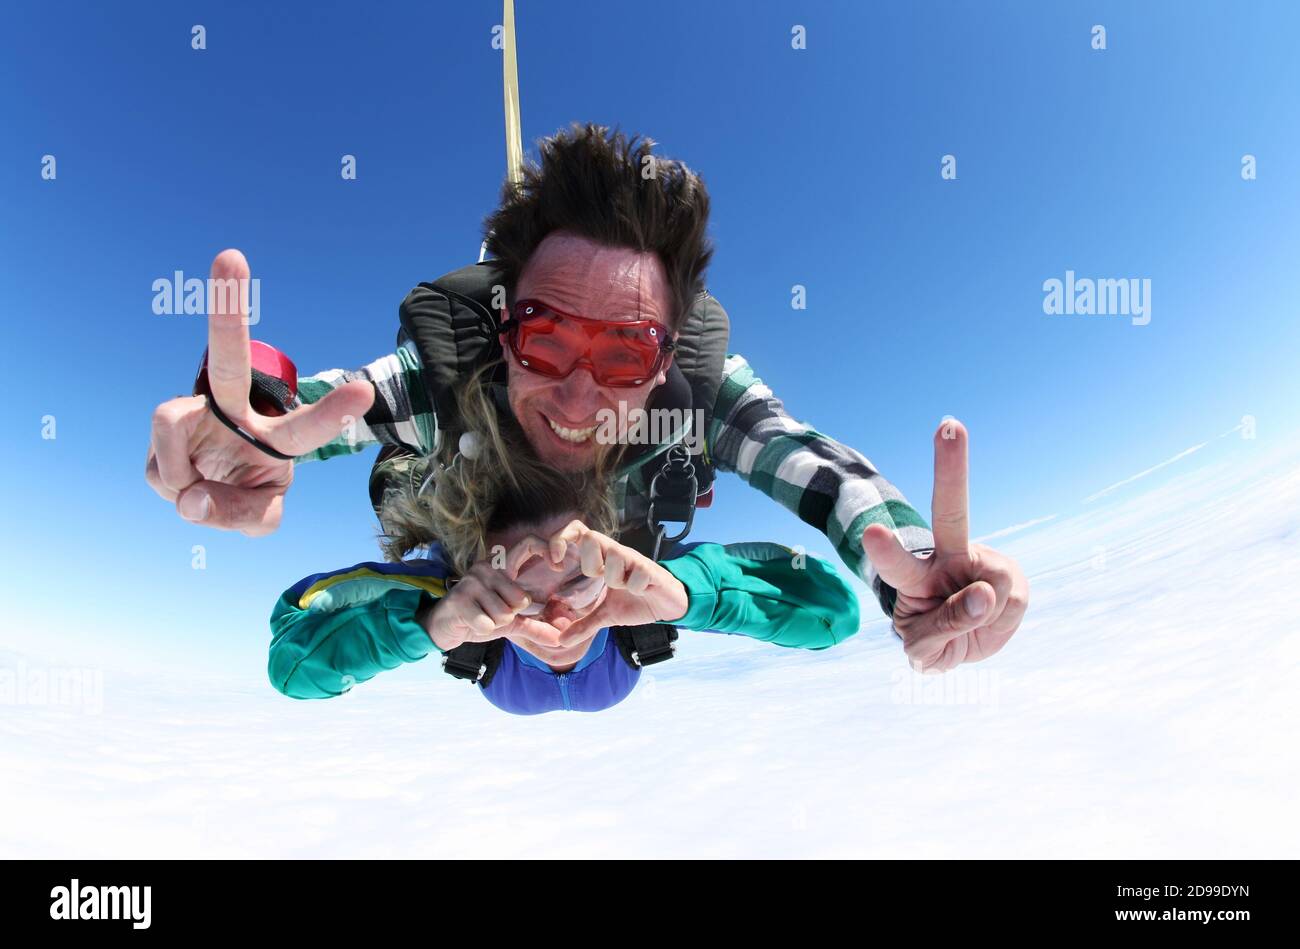 Sky diving tandem holding hands Stock Photo